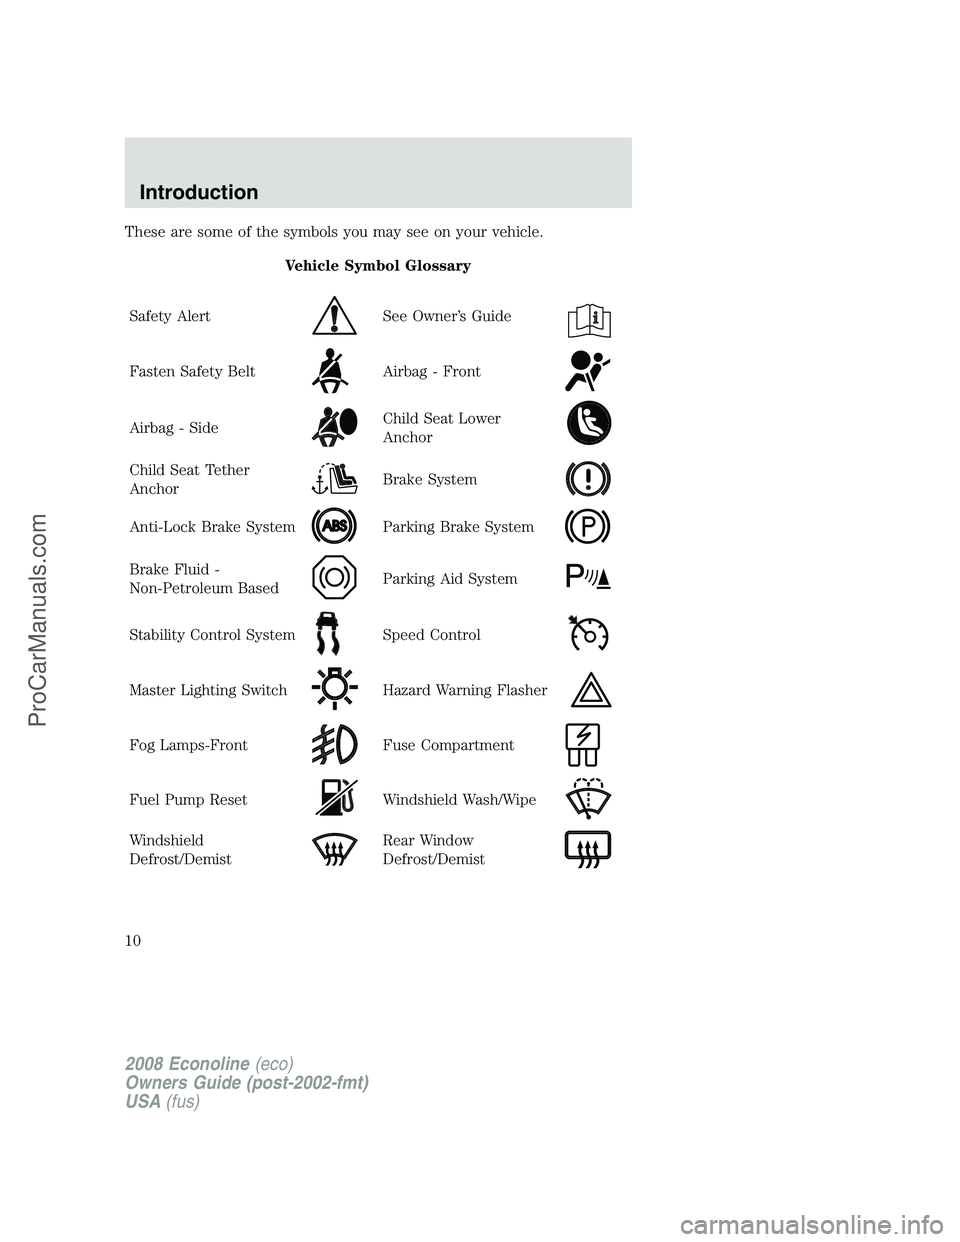 FORD ECONOLINE 2008  Owners Manual These are some of the symbols you may see on your vehicle.
Vehicle Symbol Glossary
Safety Alert
See Owner’s Guide
Fasten Safety BeltAirbag - Front
Airbag - SideChild Seat Lower
Anchor
Child Seat Tet